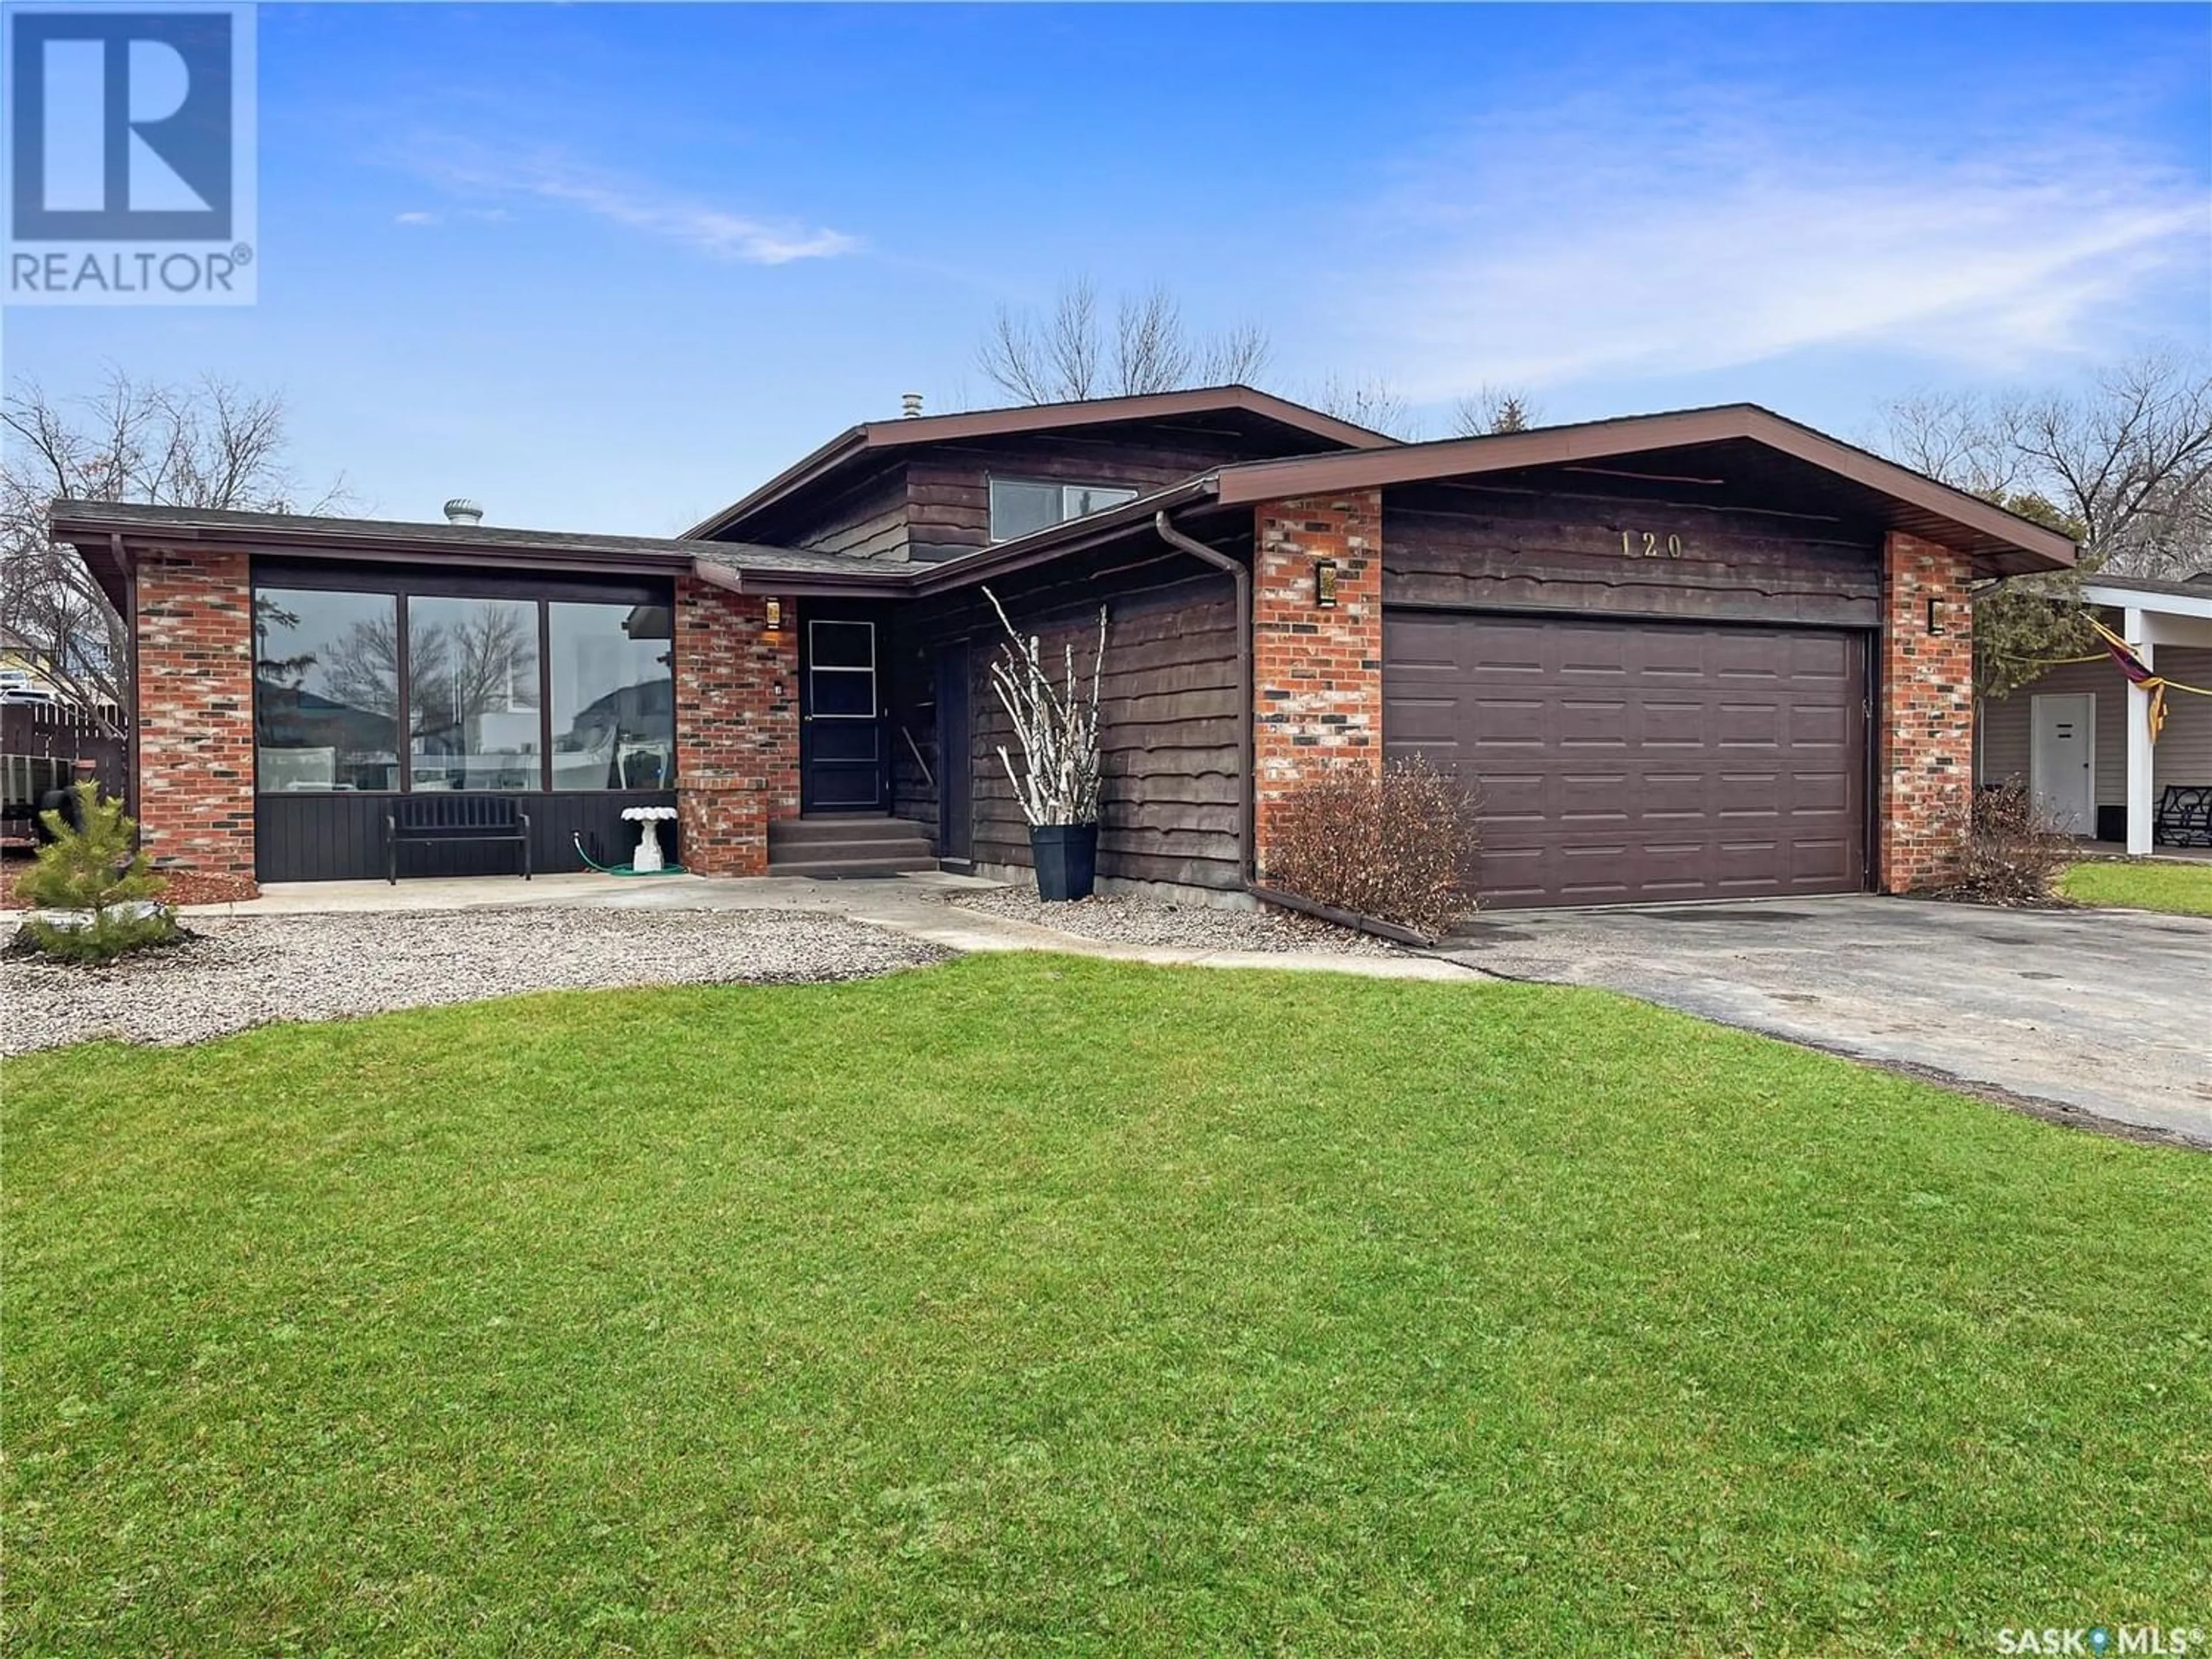 Home with brick exterior material for 120 Hayes DRIVE, Swift Current Saskatchewan S9H4E7